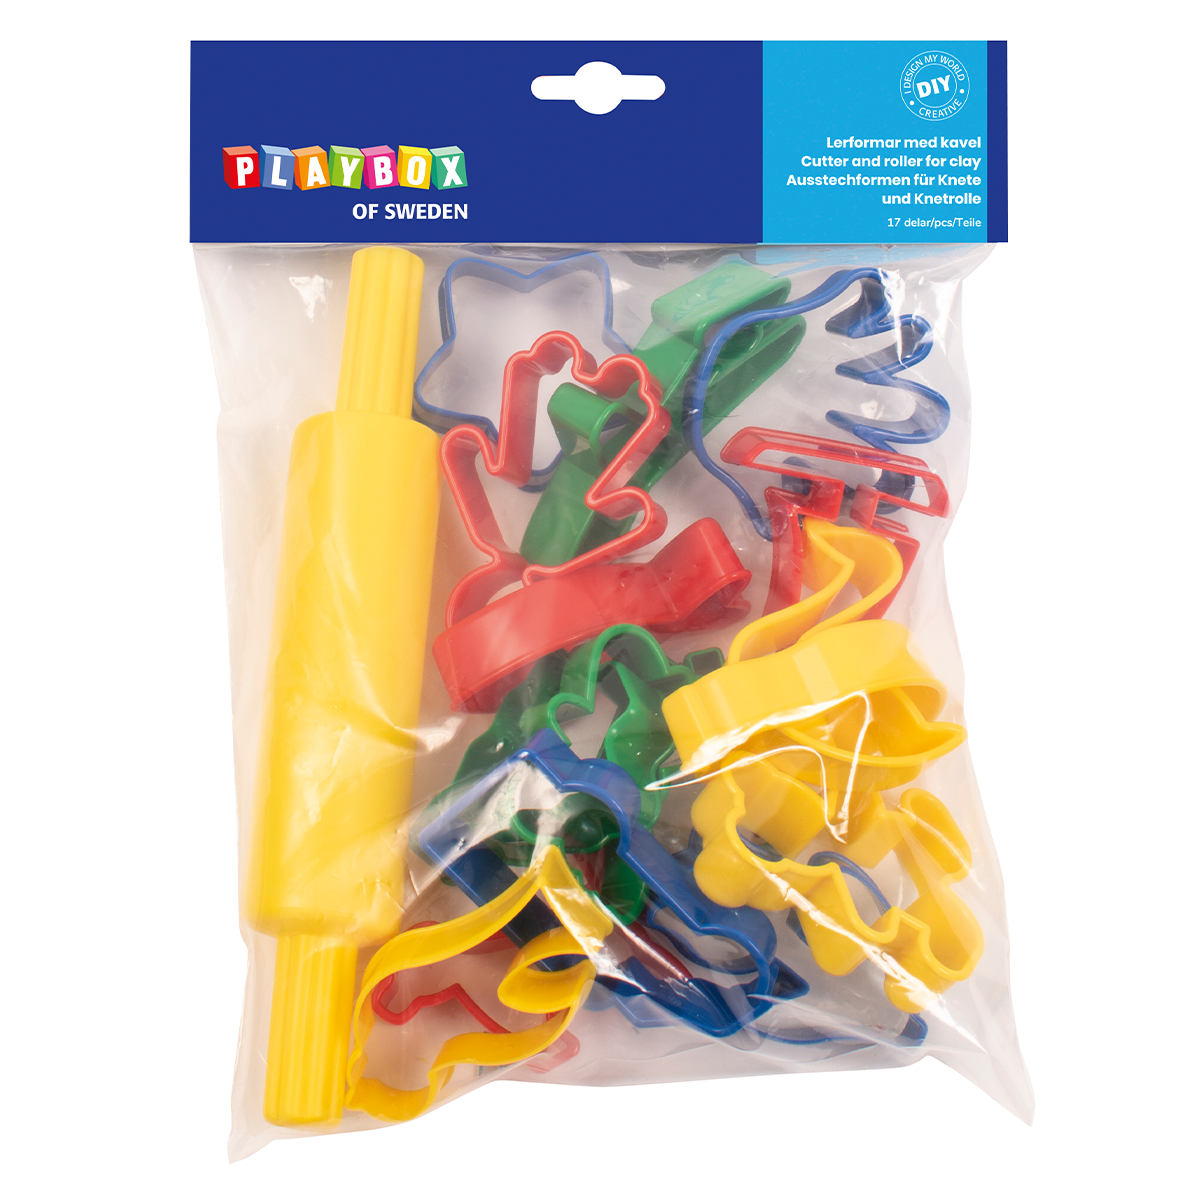 Clay Tools + Acrylic Roller in the group Kids / Kids' Paint & Crafts / Modelling Clay for Kids at Pen Store (126854)